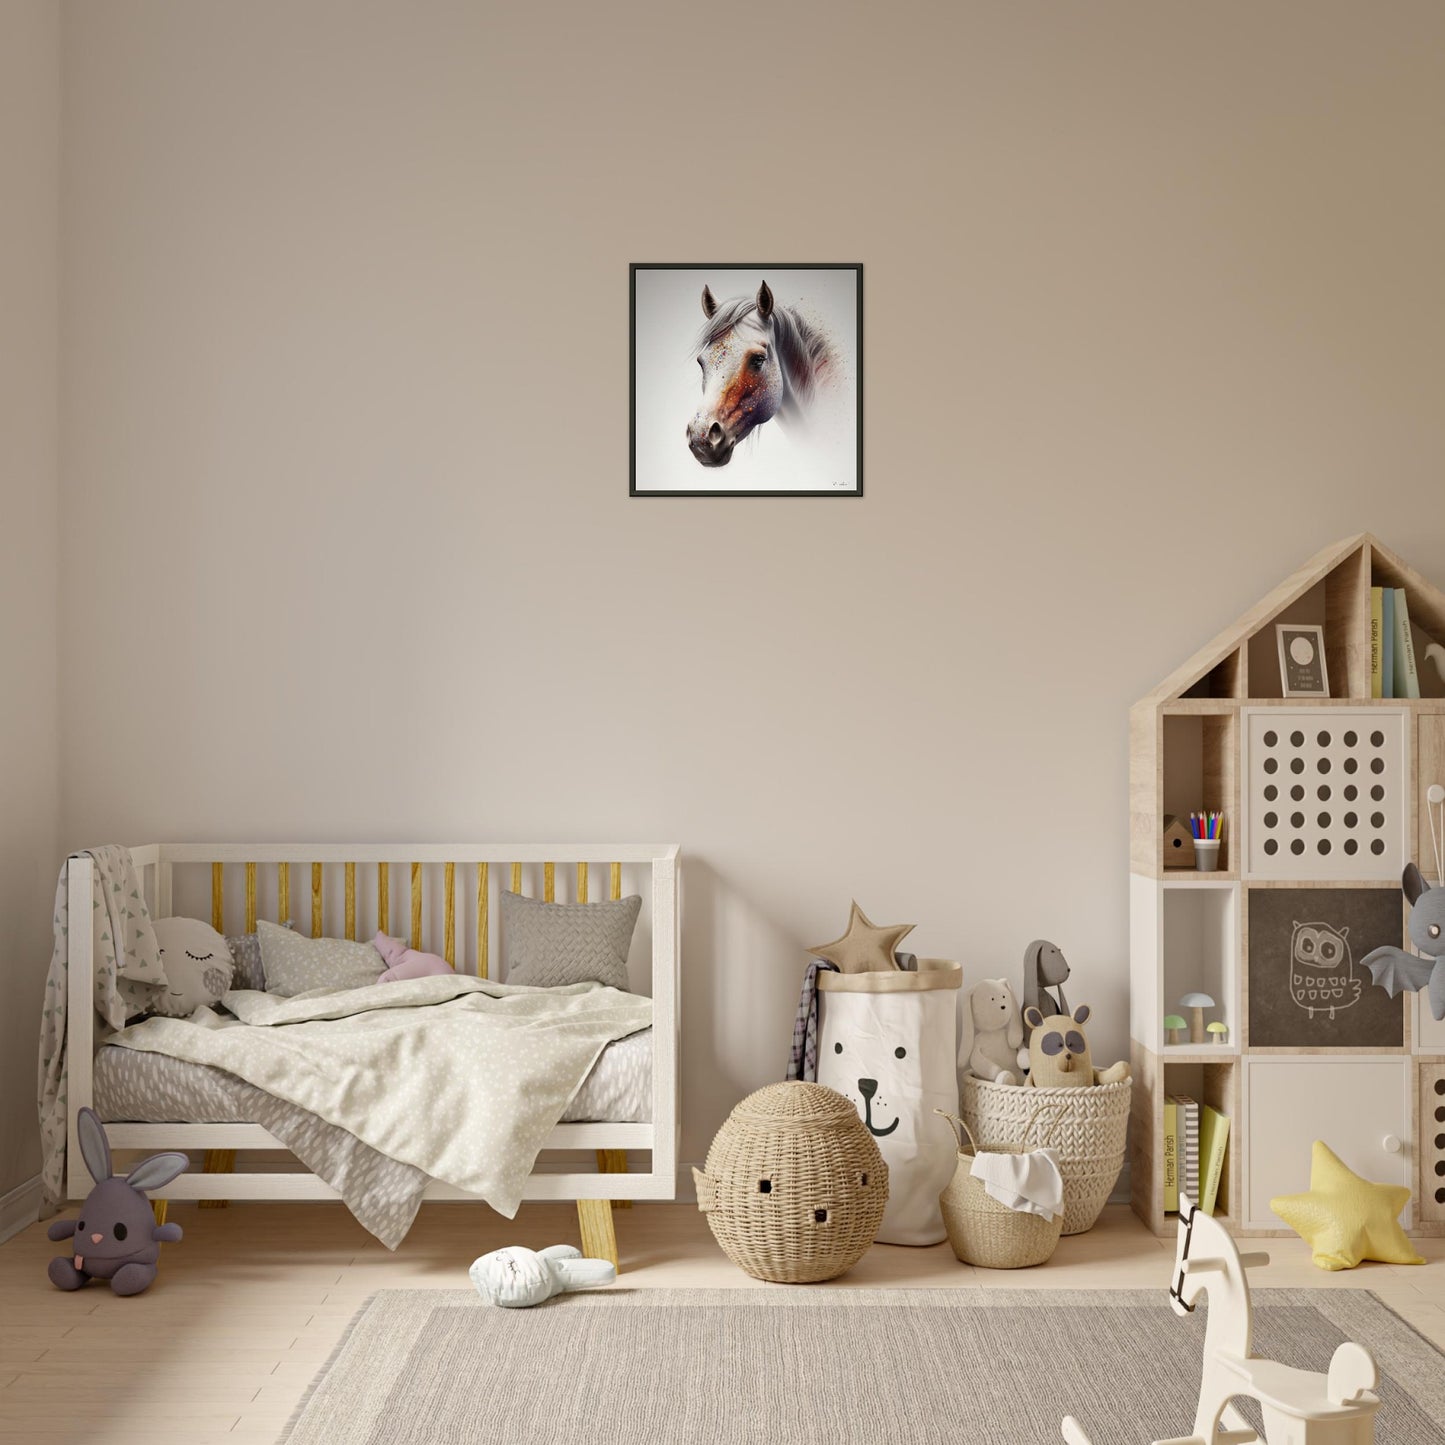 Shiny and Peaceful Fantasy Horse - Metal Framed Poster